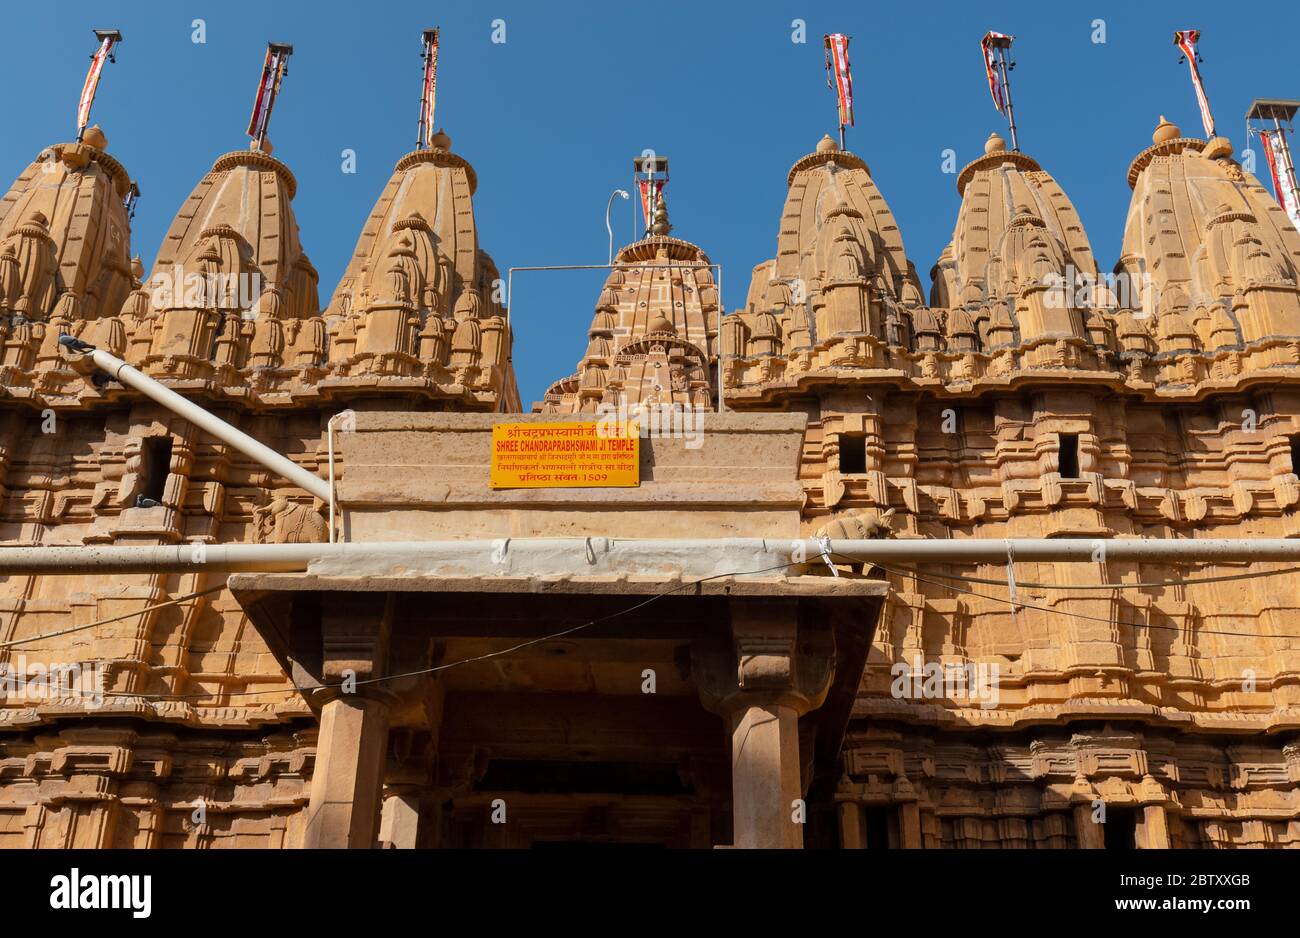 A view of famous and old Jain Temples and it's architecture inside the Jaisalmer Fort Stock Photo